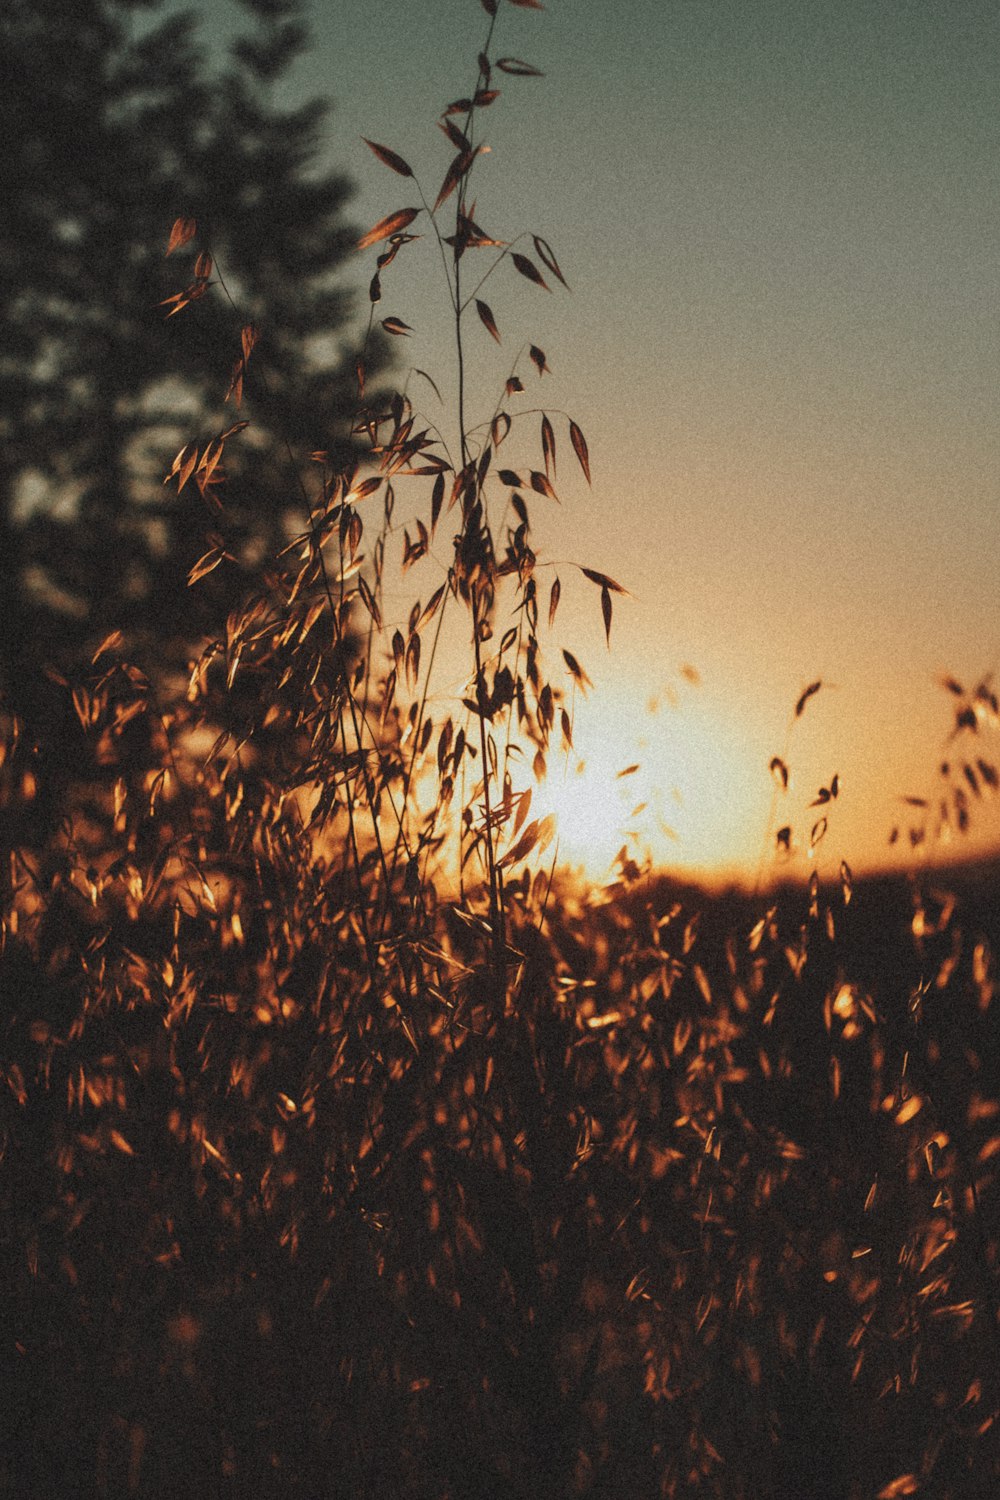 silhouette of plants during sunset